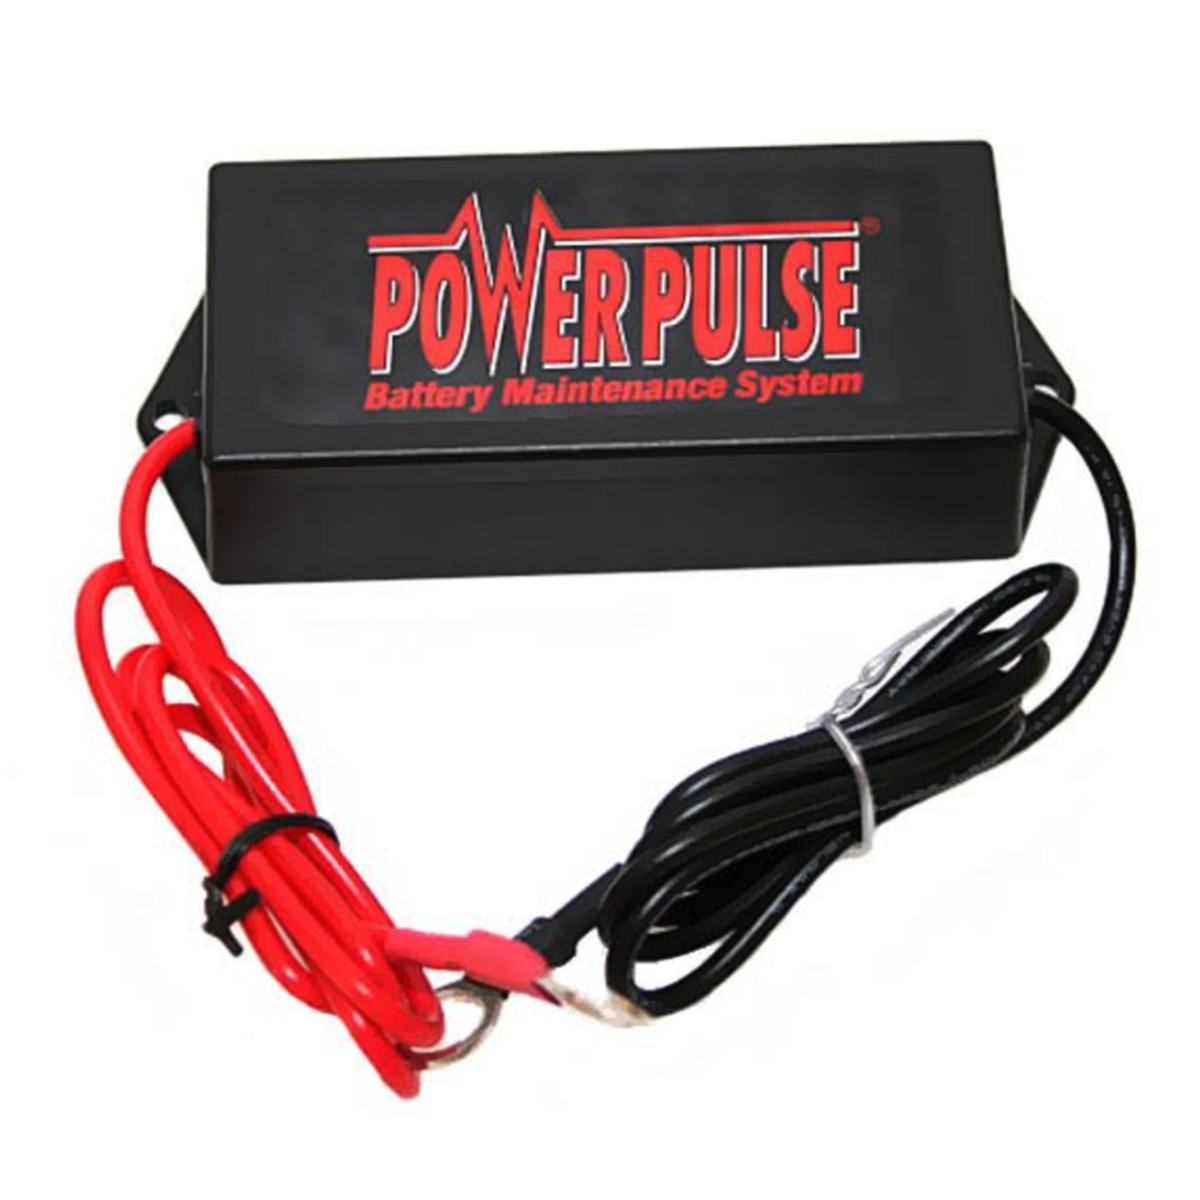 24V Charger with Reel – PulseTech